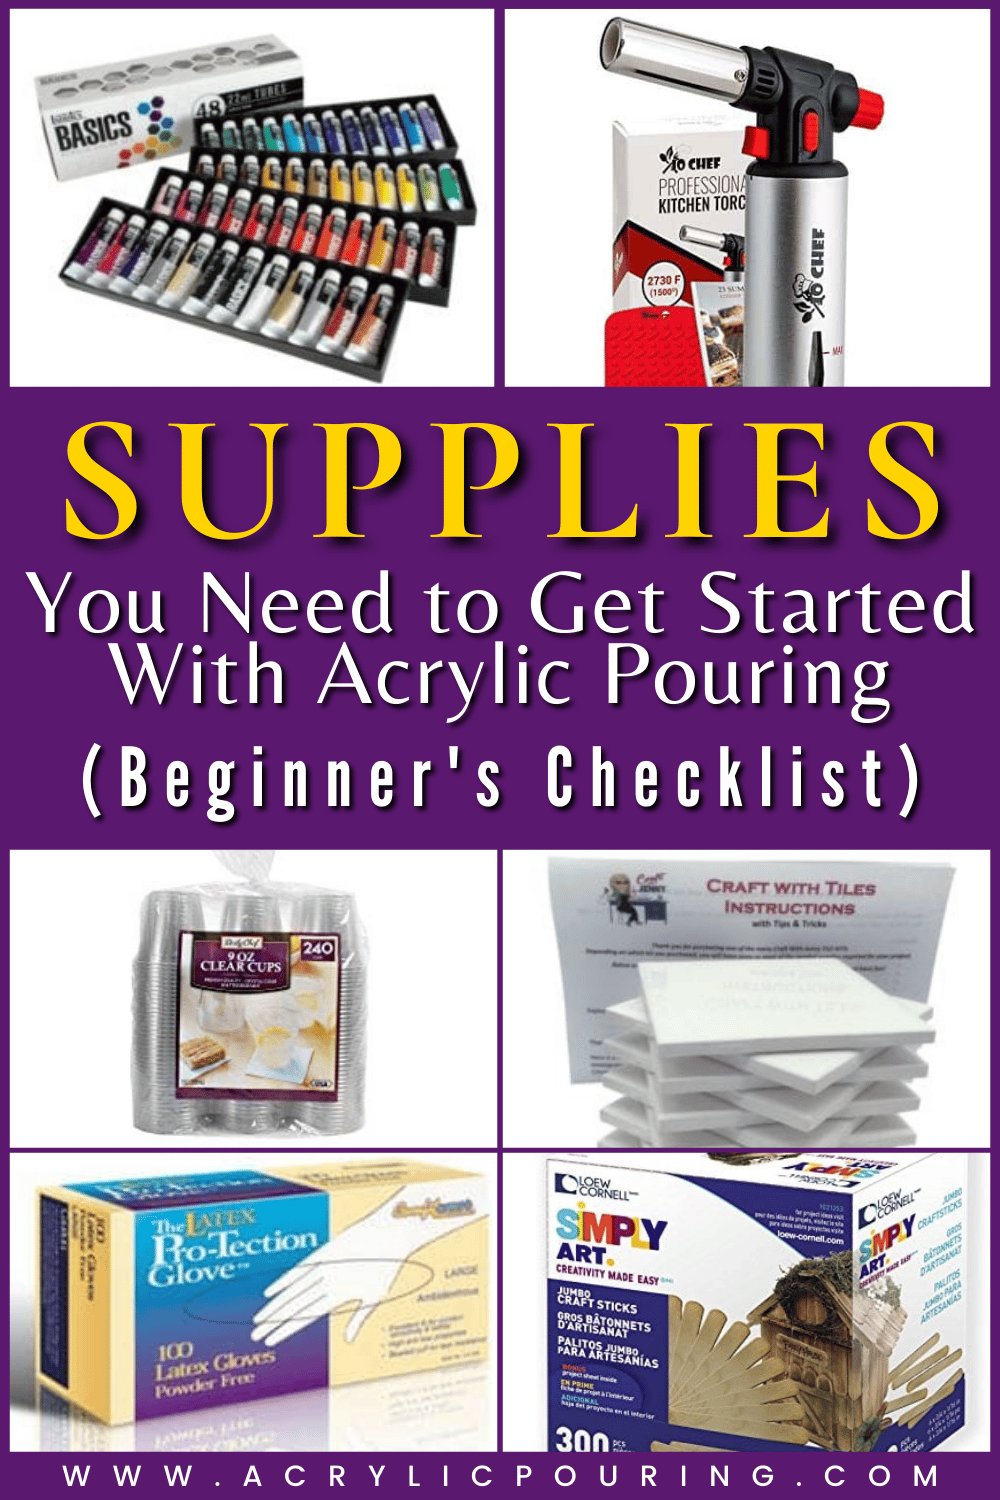 Supplies You Need to Get Started With Acrylic Pouring (Beginner Checklist)